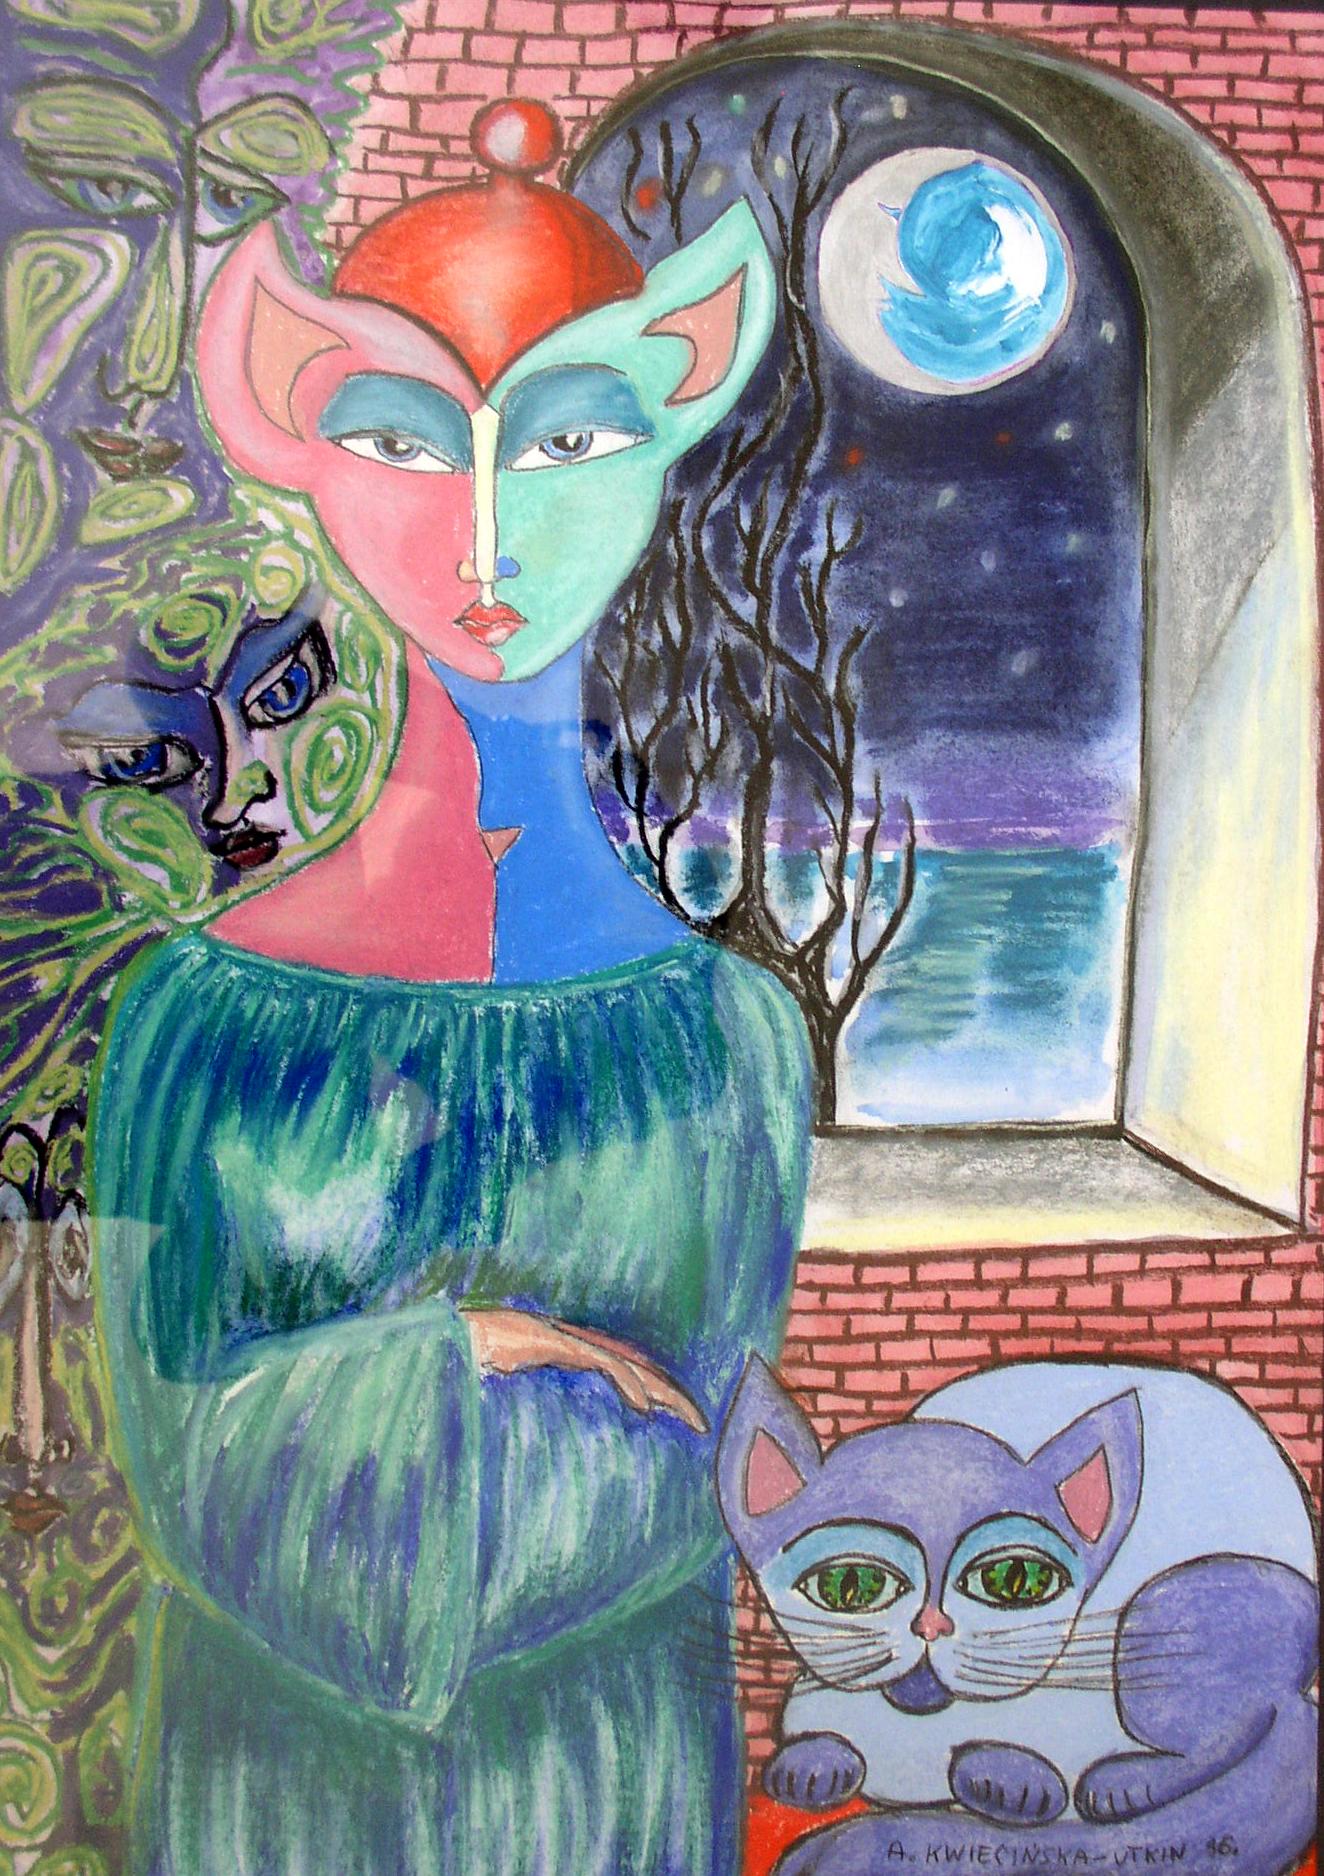 The night tree - Mixed Media Figurative Drawing, Fantasy, Surreal, Colorful